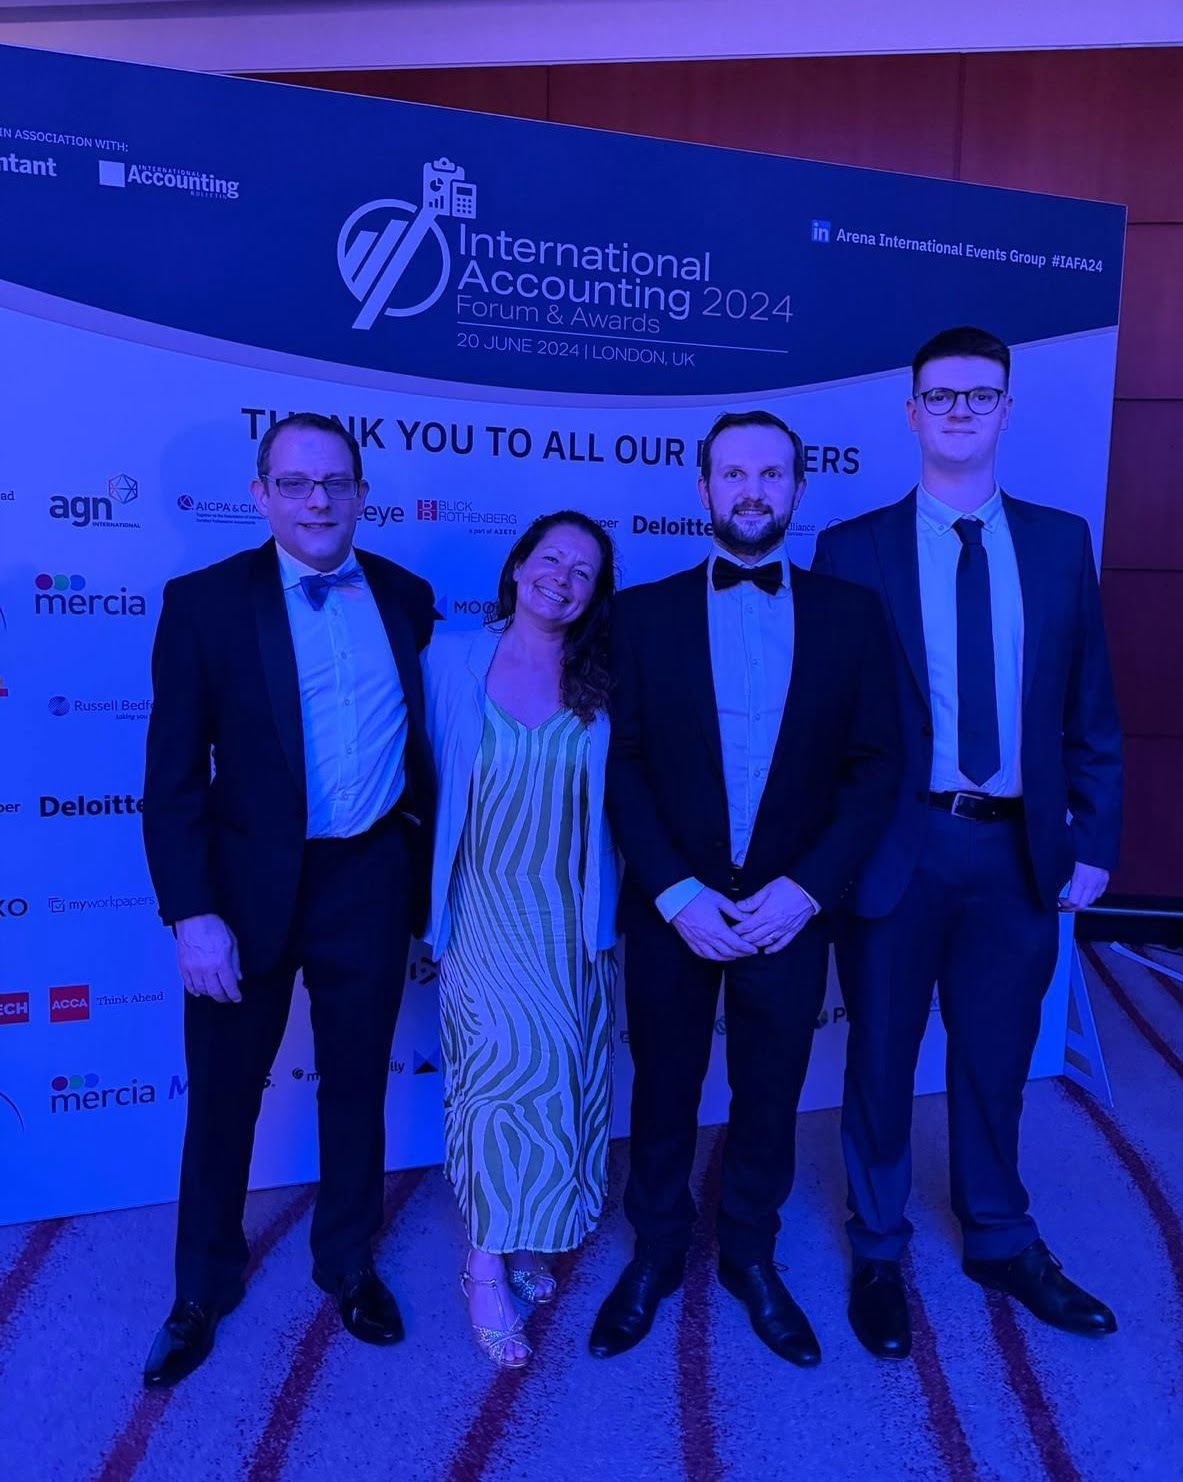 Summa Tech earns high commendation at International Accounting Forum and Awards